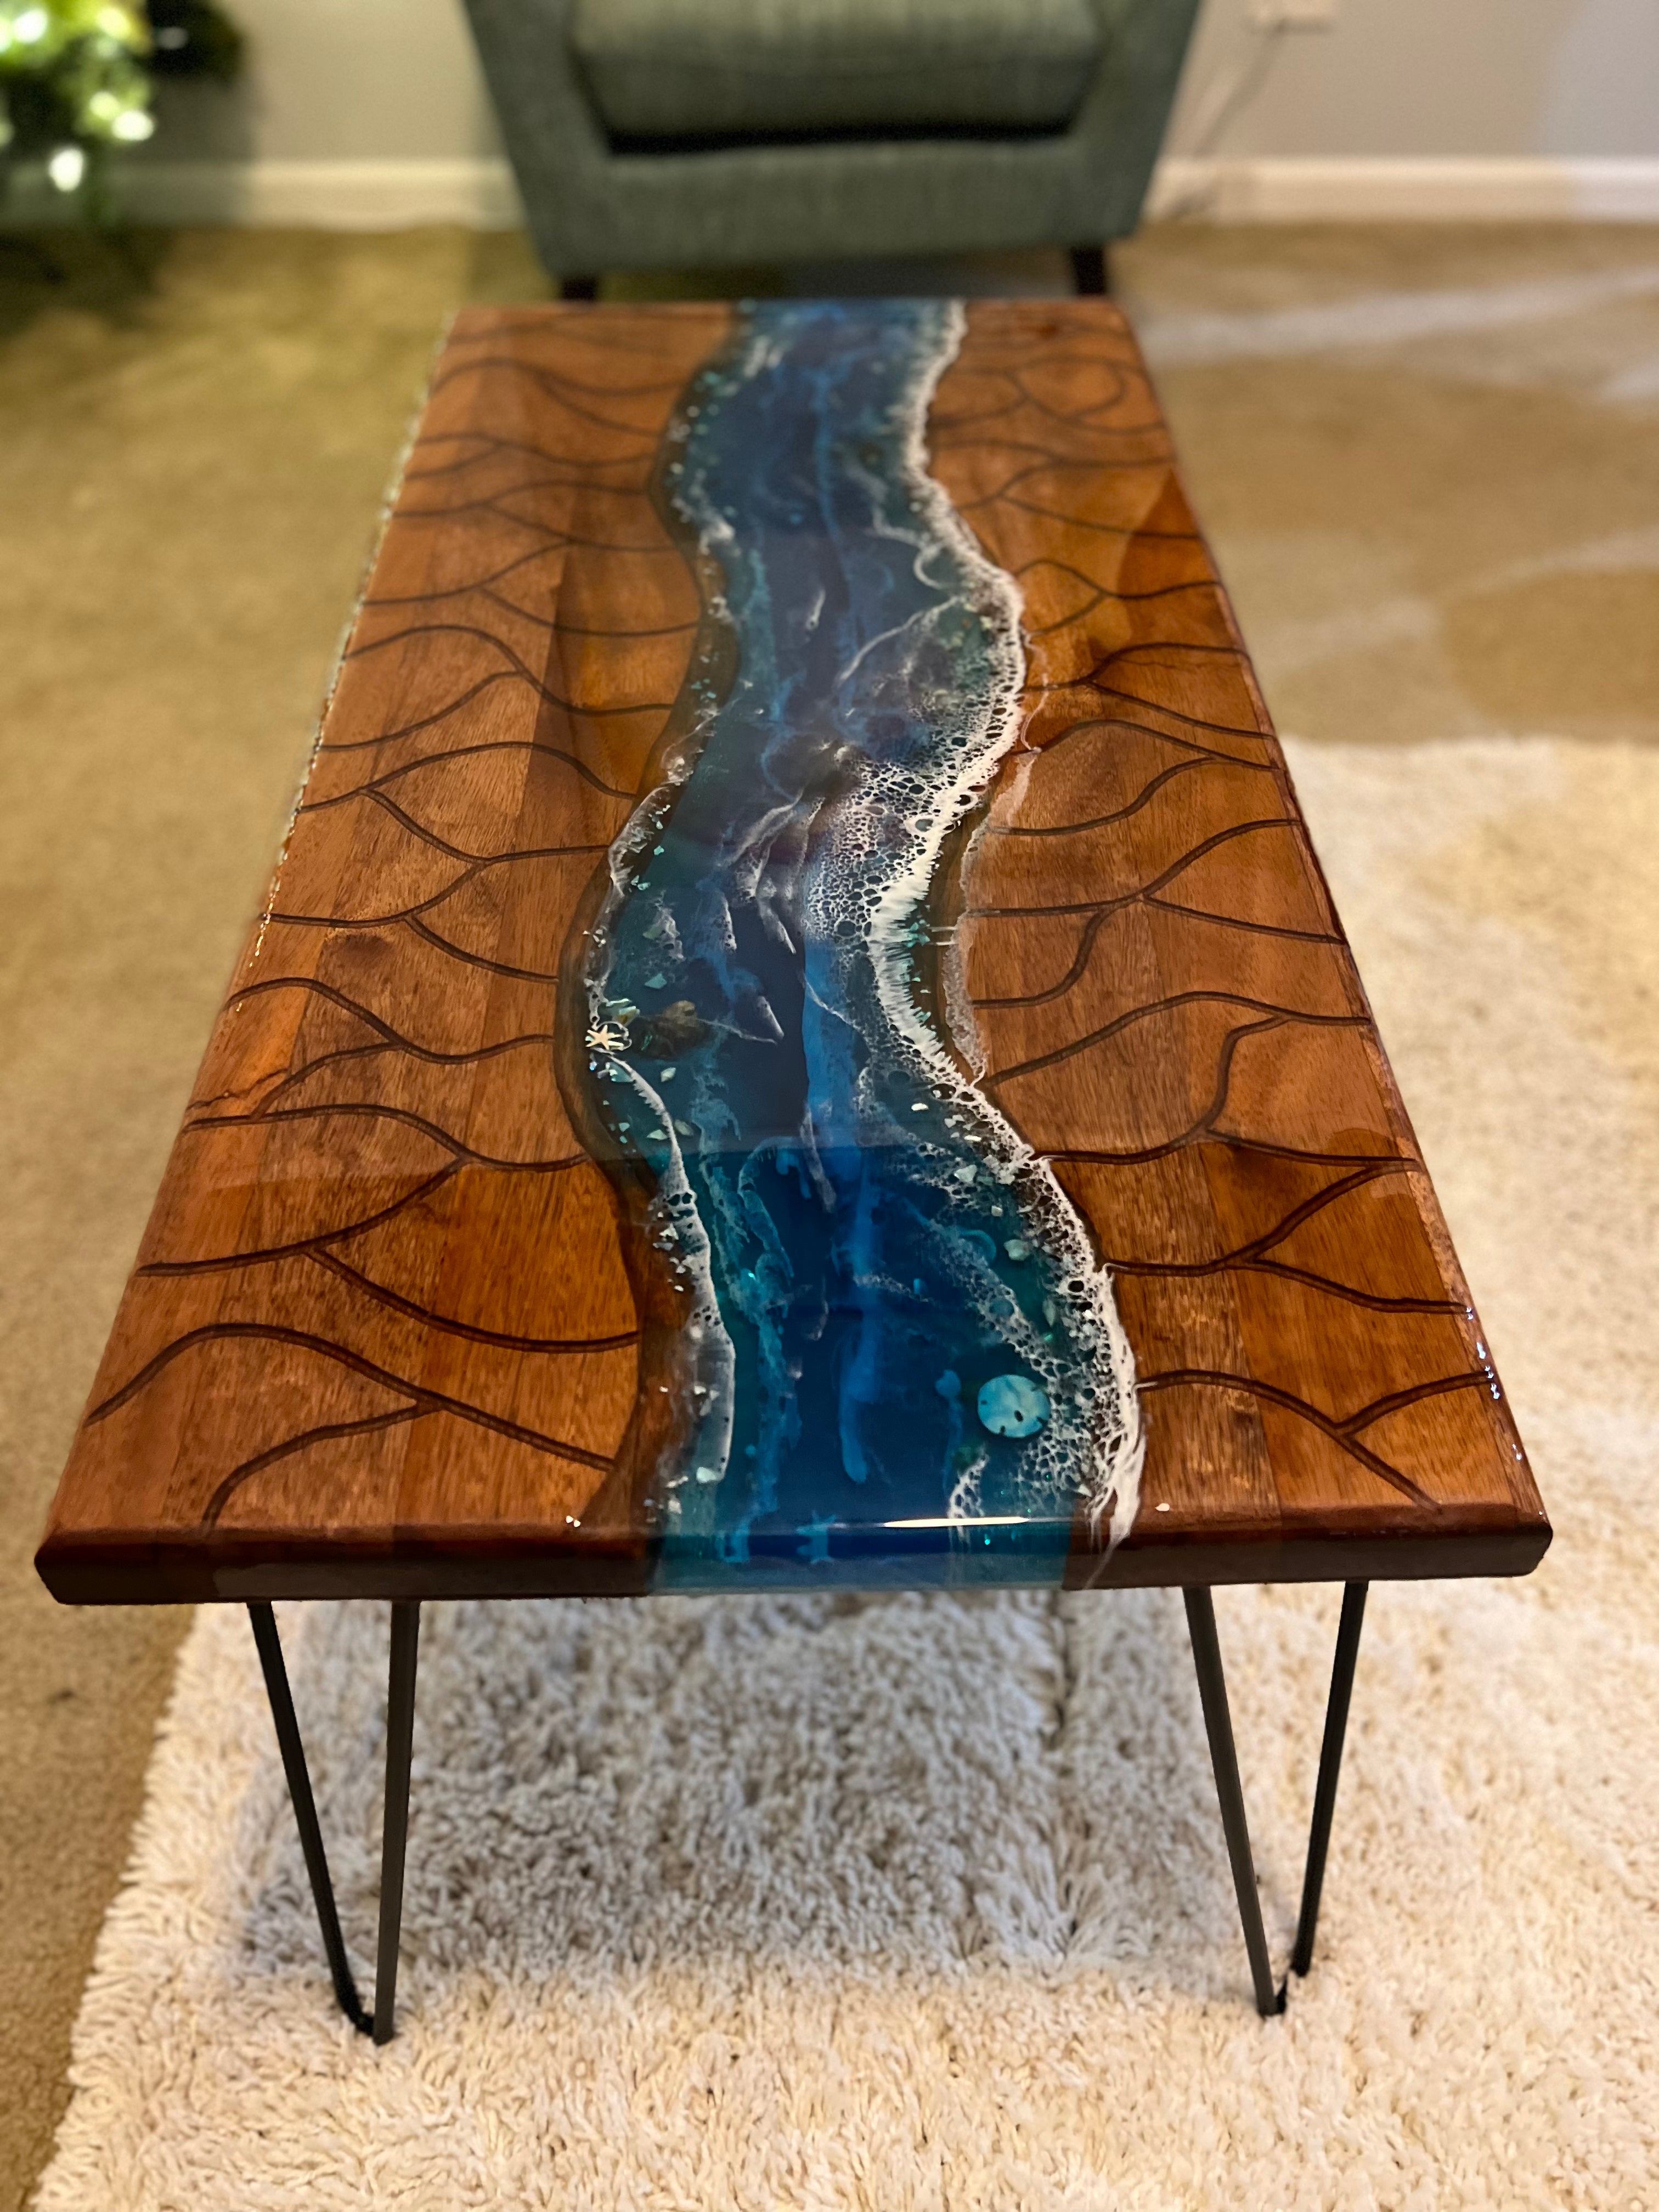 Luminescent River Poured Mahogany Coffee Table